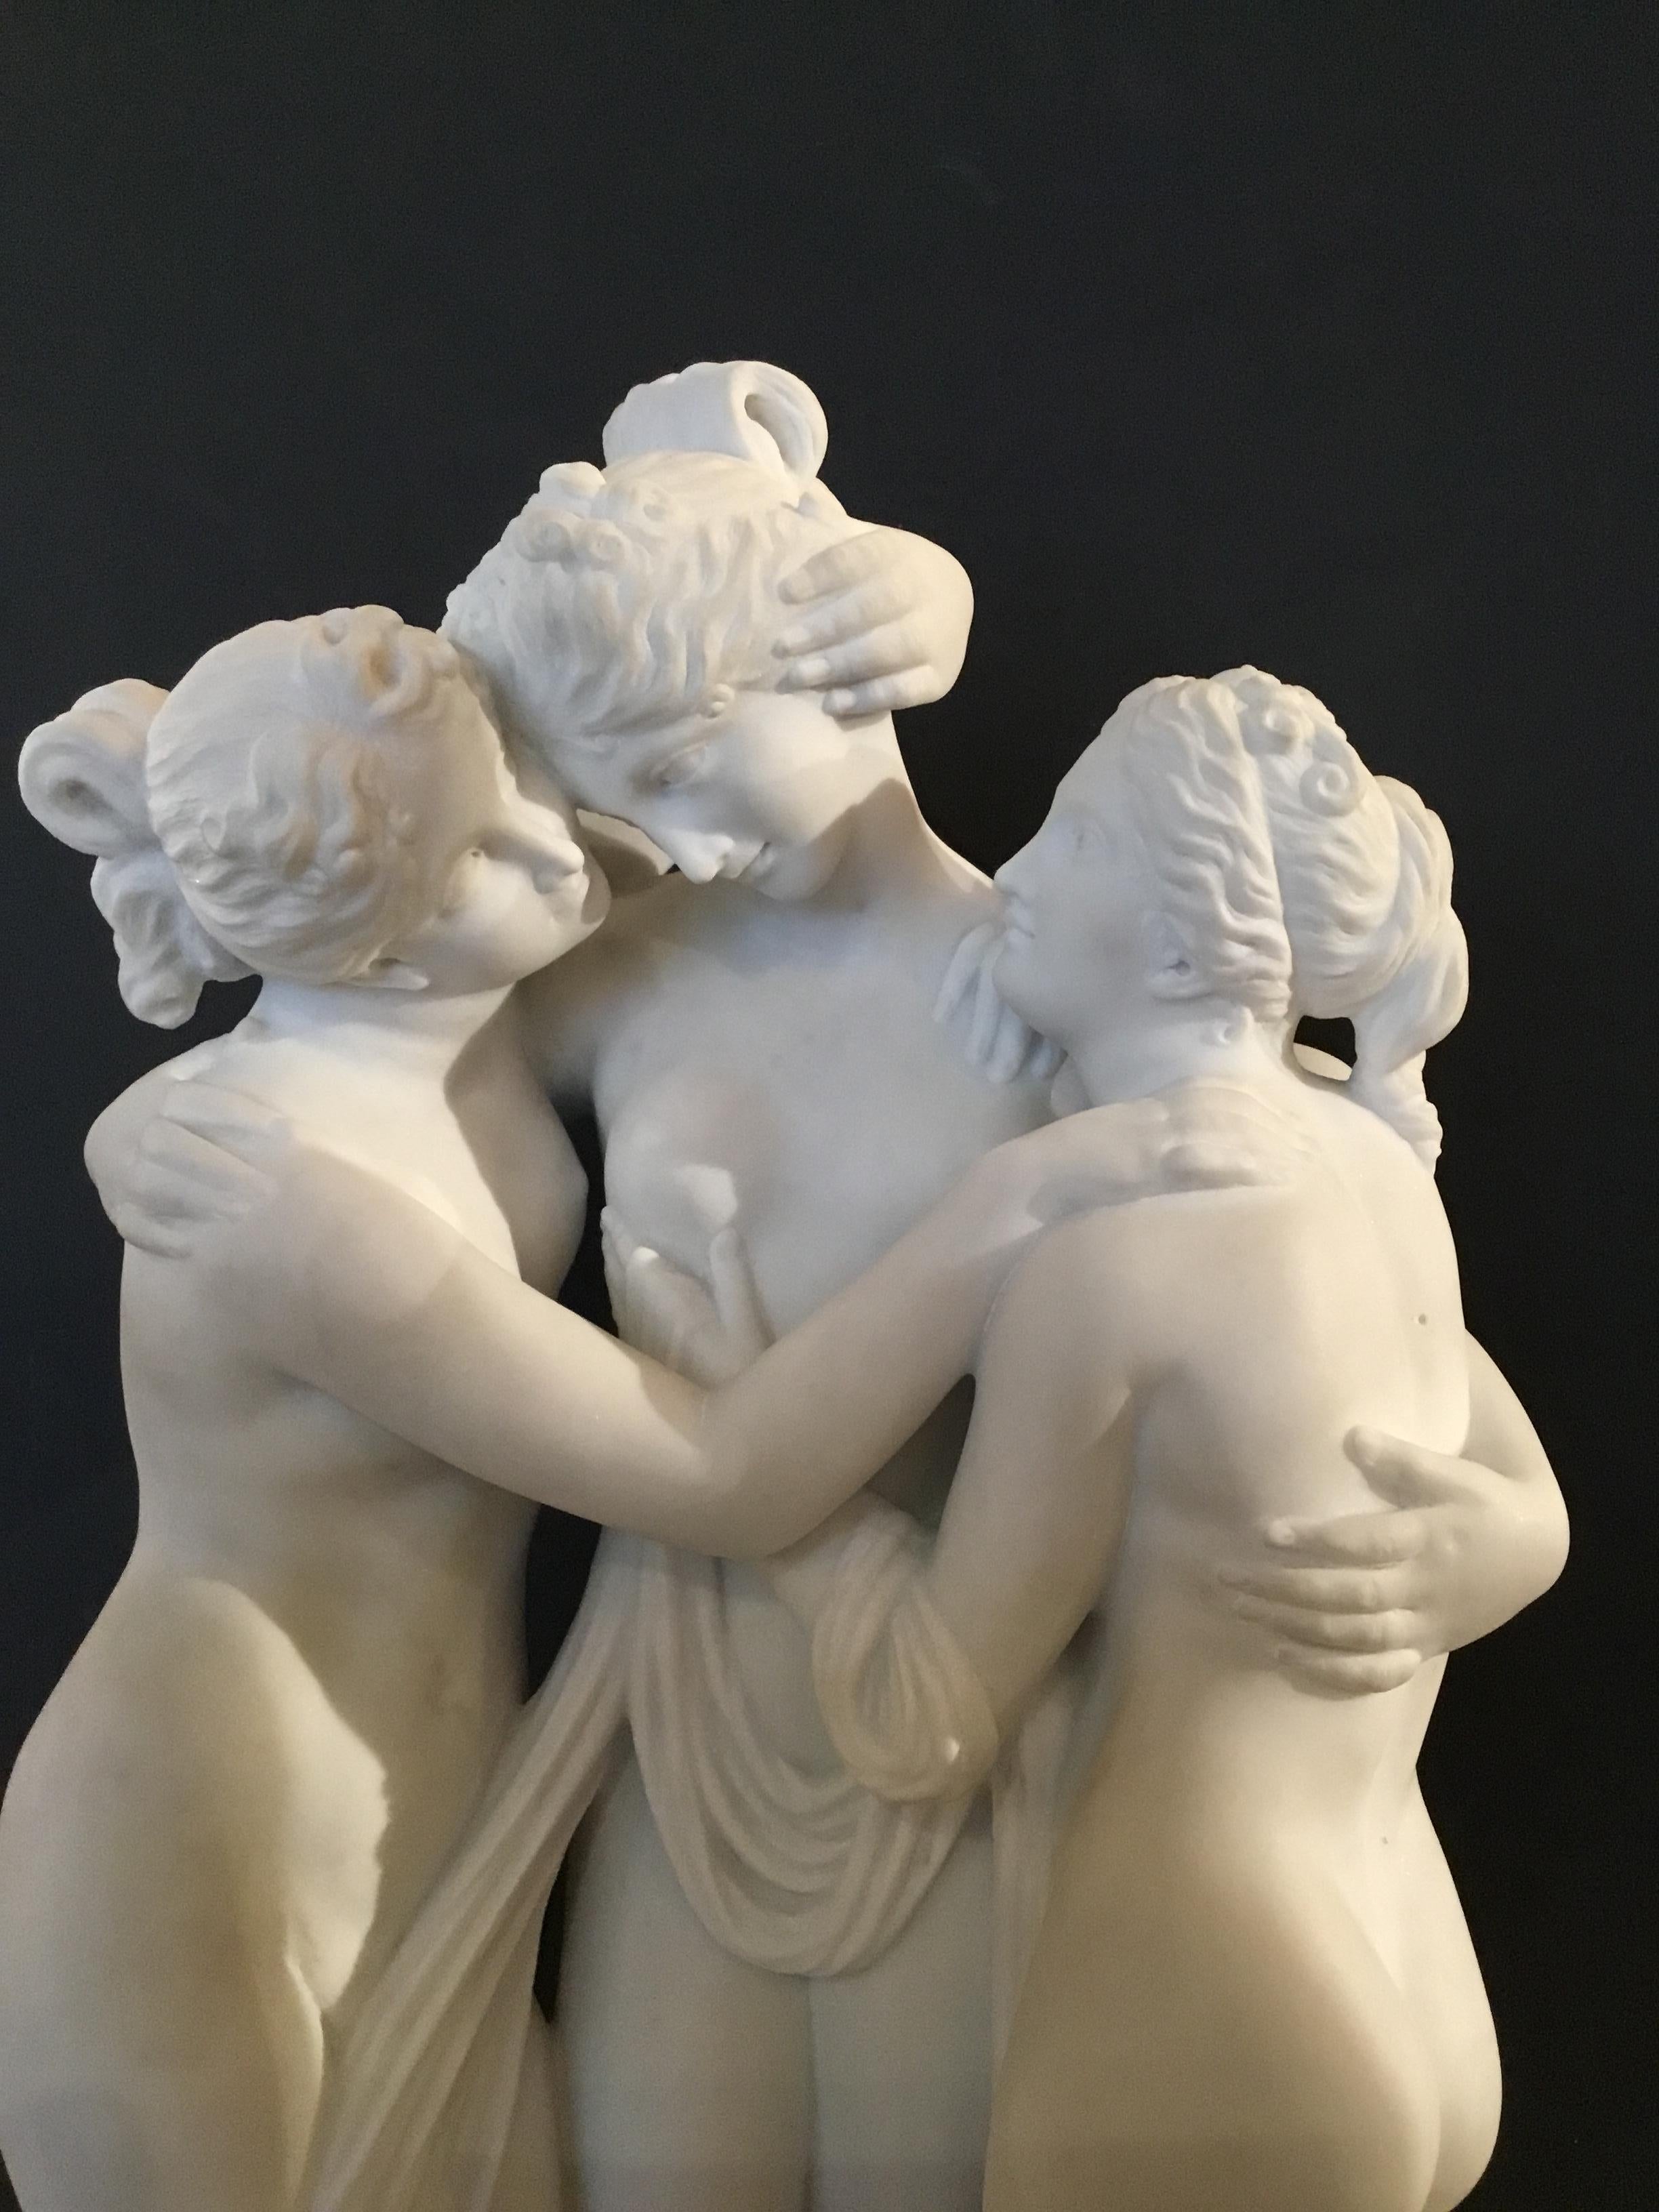 Carved figural sculpture of “the three graces” carved in white marble
Set on a gray veined marble base, inscribed “Canova” at base
After Antonio Canova commissioned by Empress Josephine and now
Conserved at the hermitage, St. Petersburg.